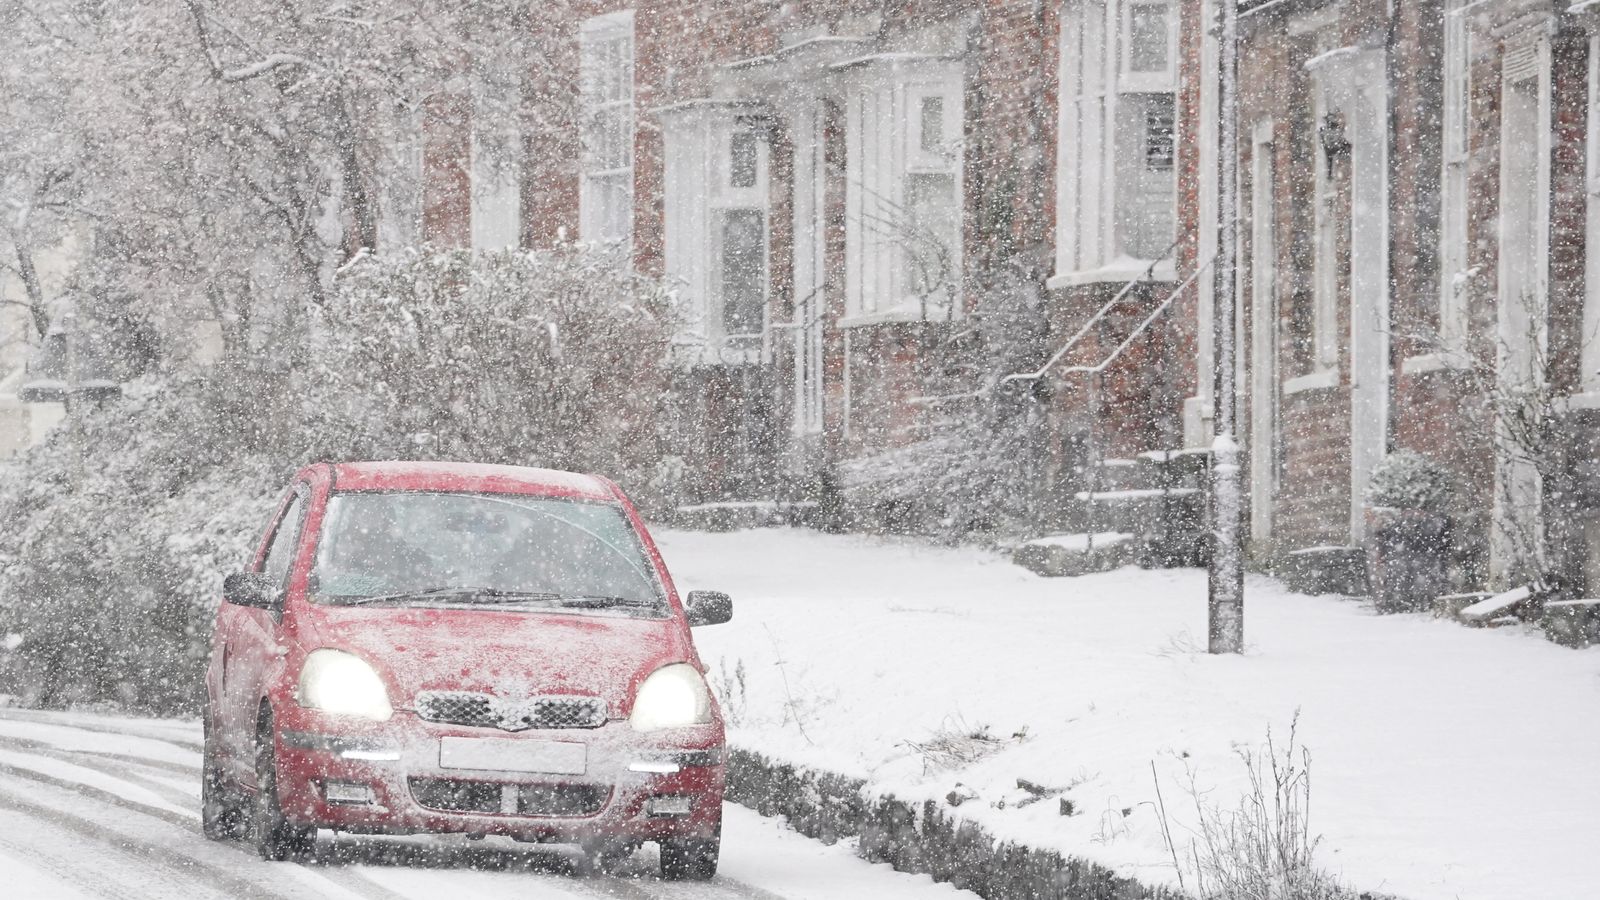 UK weather: New warnings as UK to be hit by snow - temperatures set to plunge as low as -5C